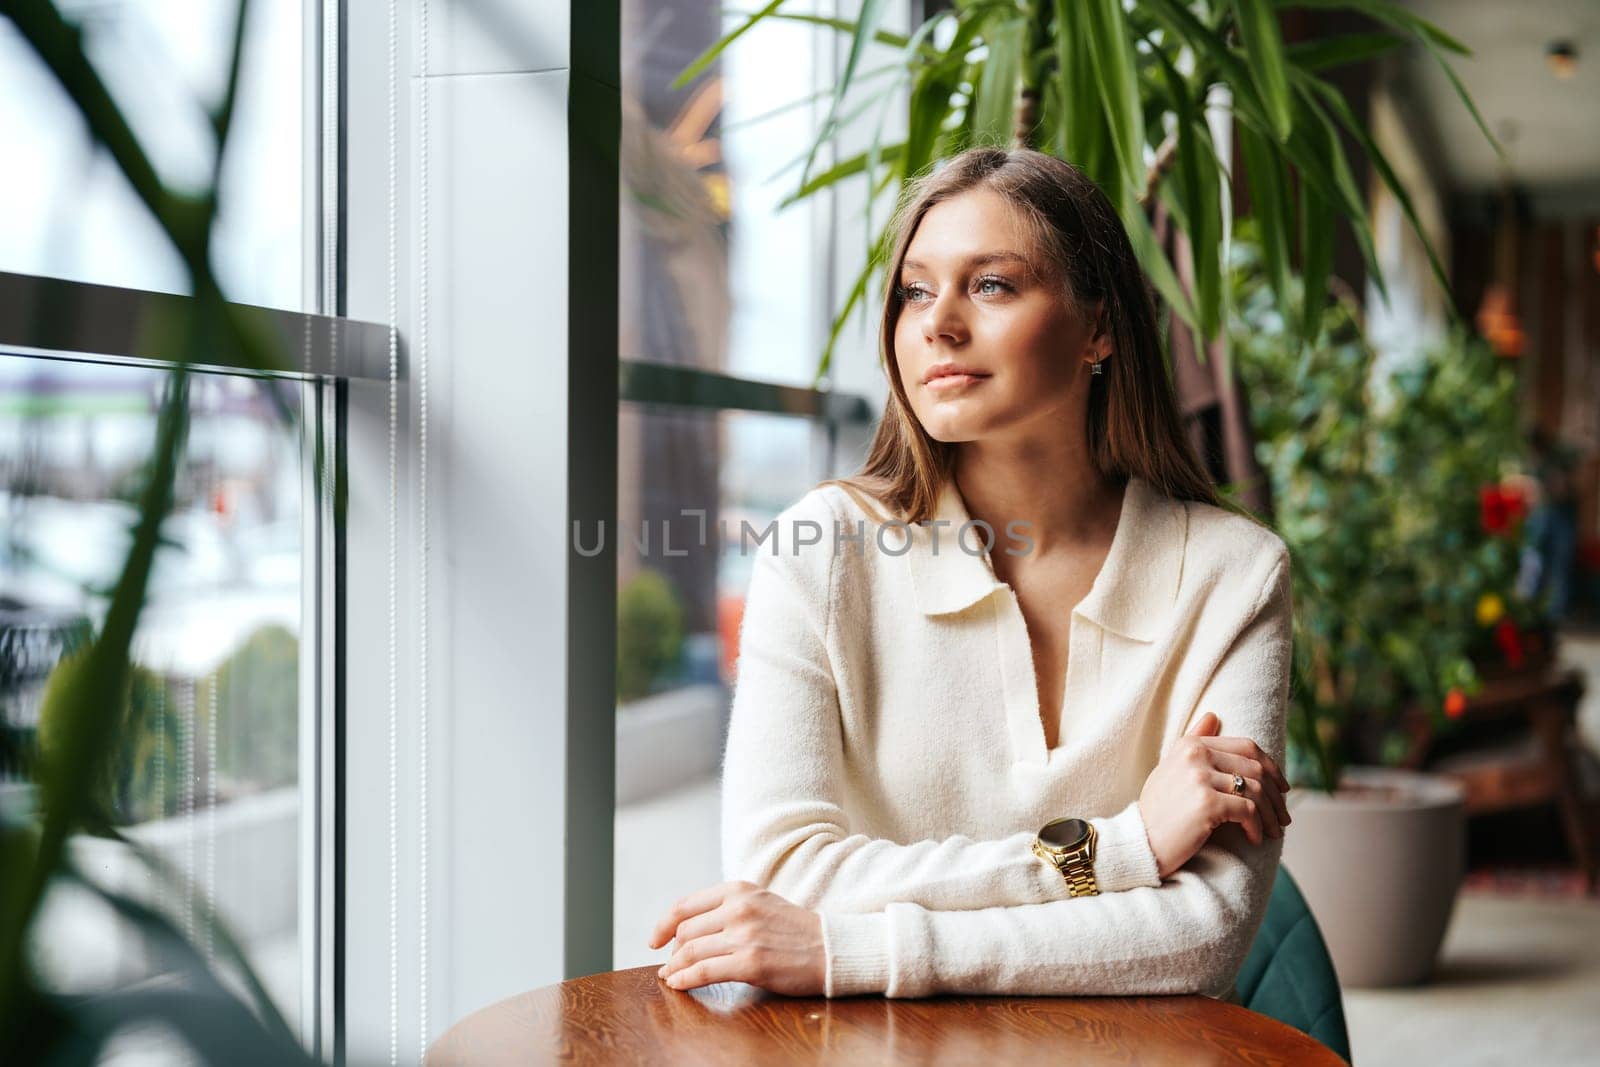 A woman is seated at a wooden table positioned in front of a large window. She appears to be focused on something outside, with natural light illuminating the scene.